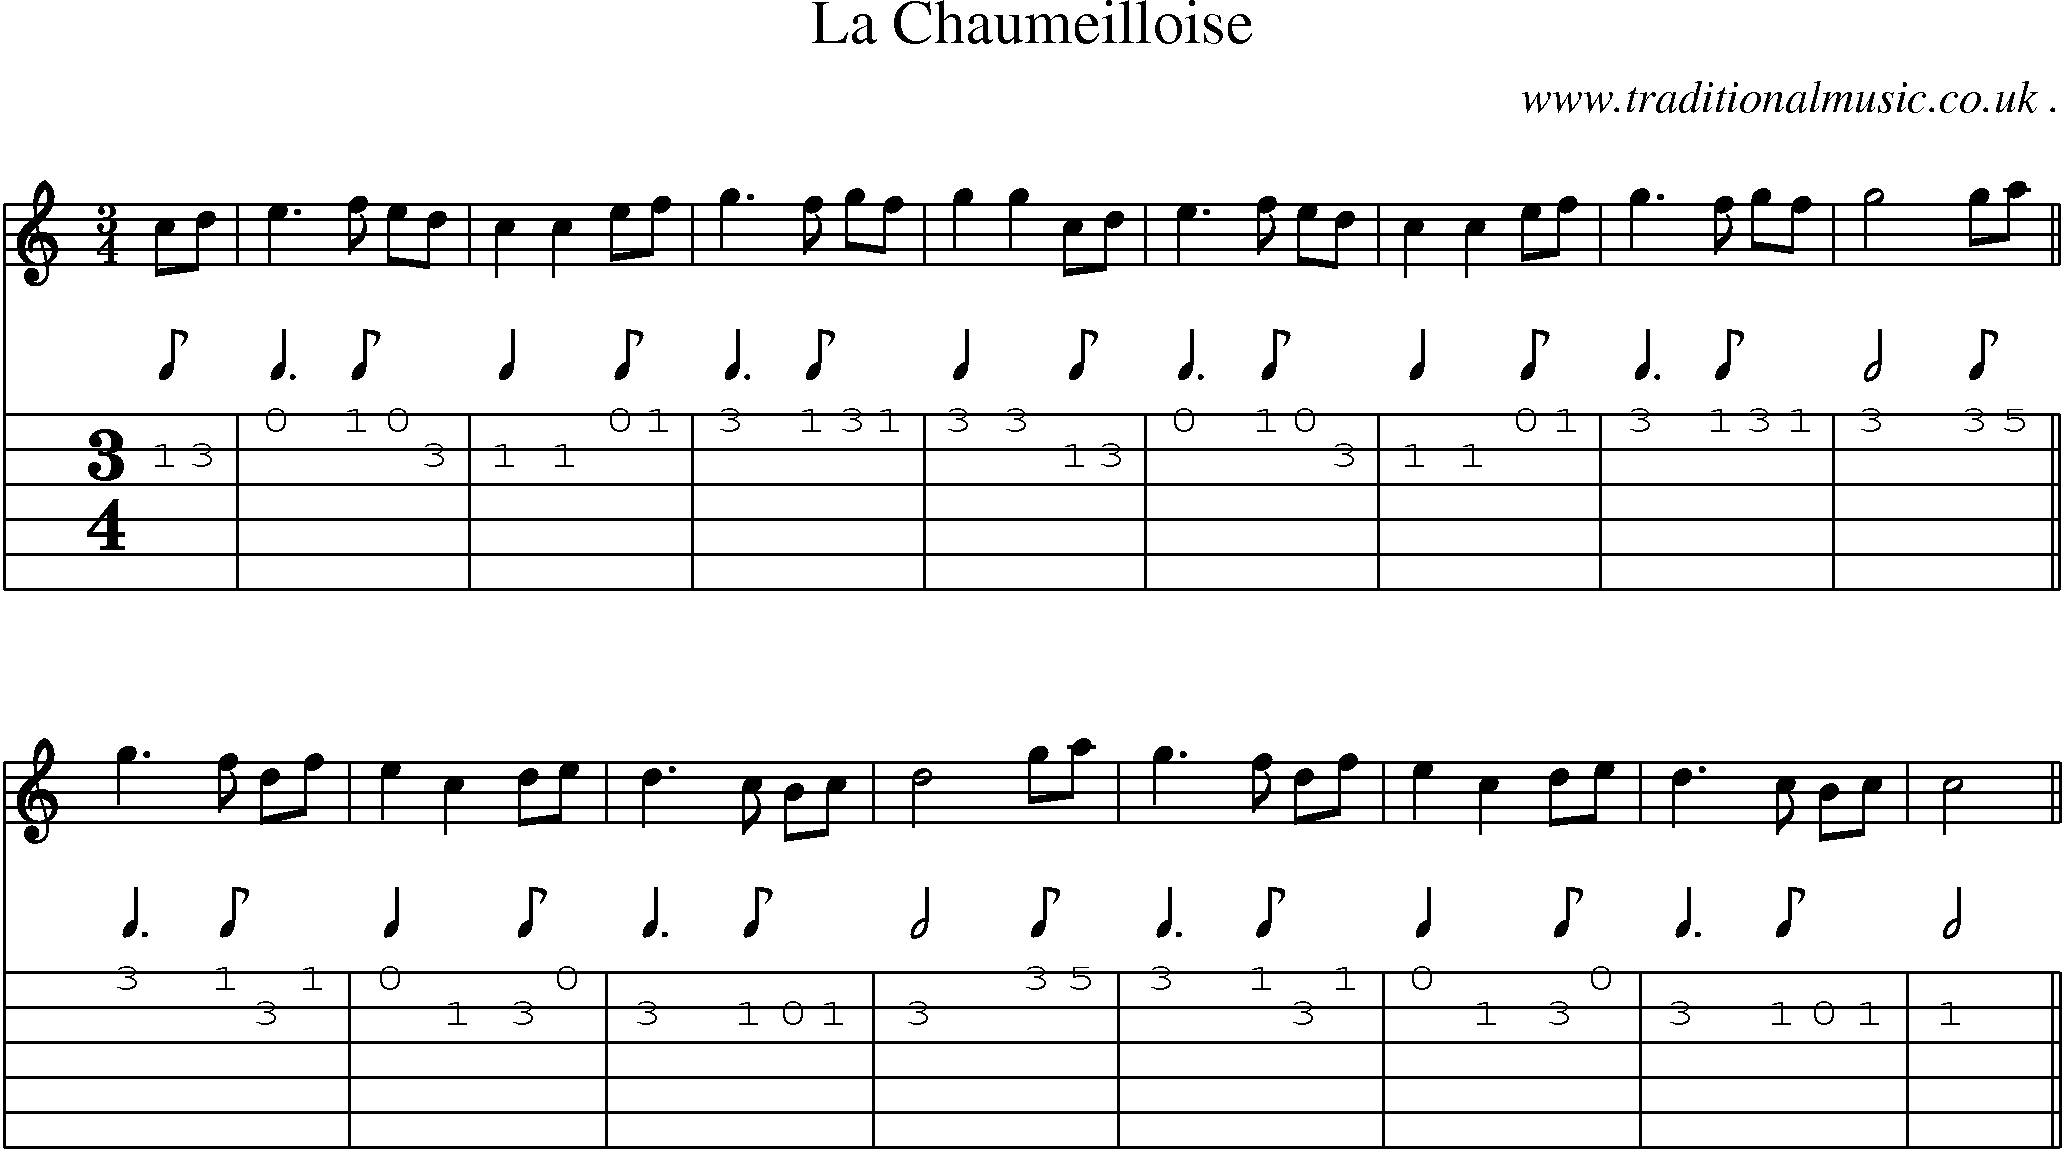 Sheet-Music and Guitar Tabs for La Chaumeilloise